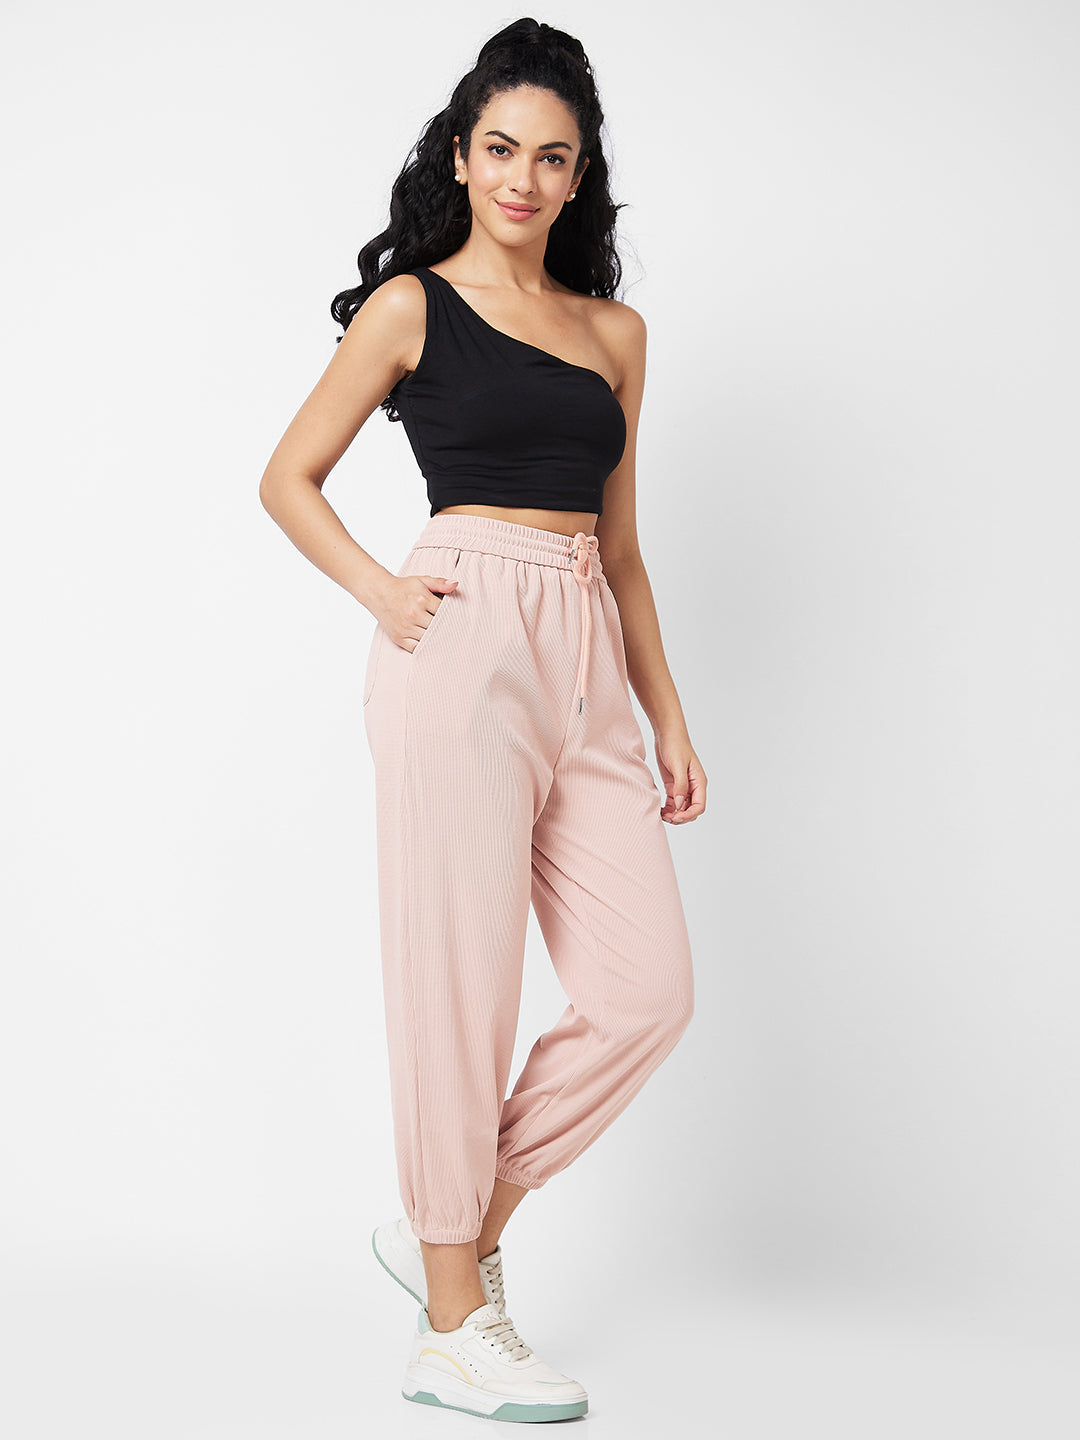 Spykar Jogger Fit Pink Knits Track Pants For Women